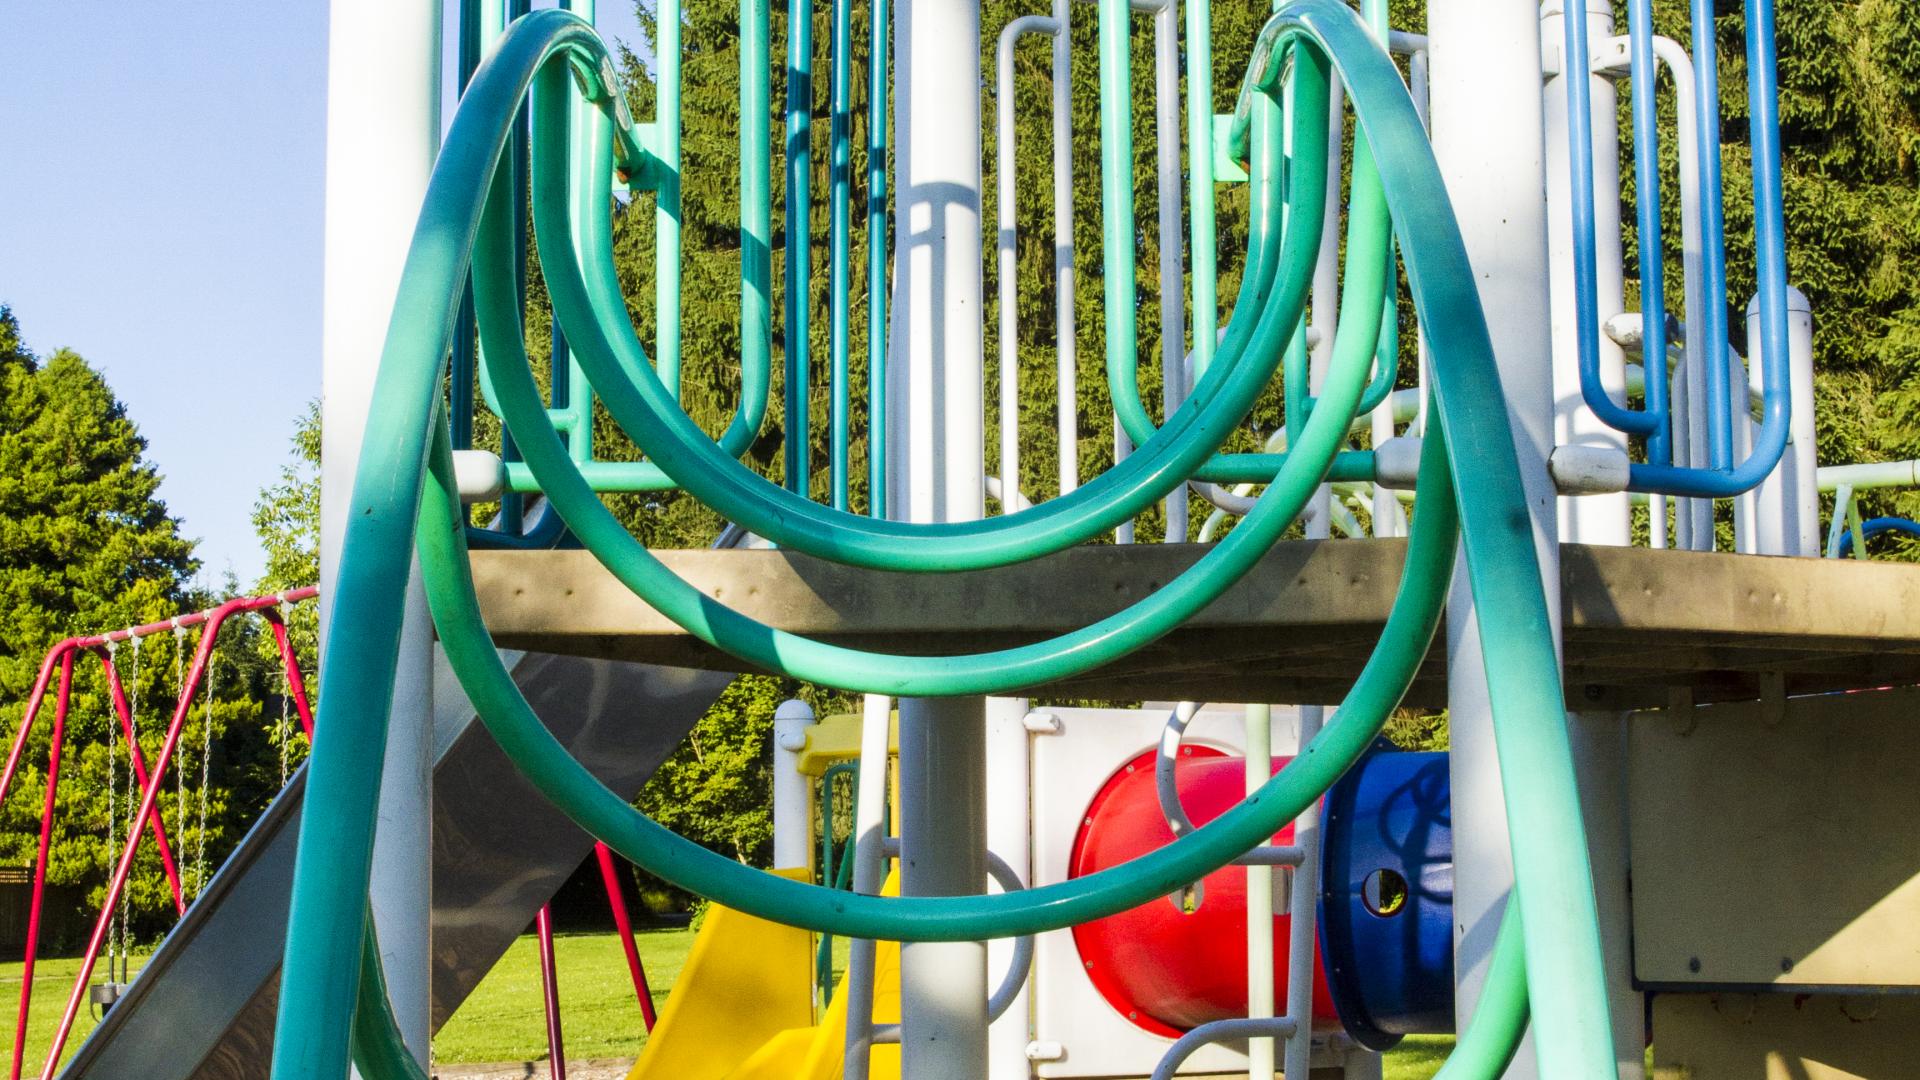 A rounded ladder up to the top of a playground.